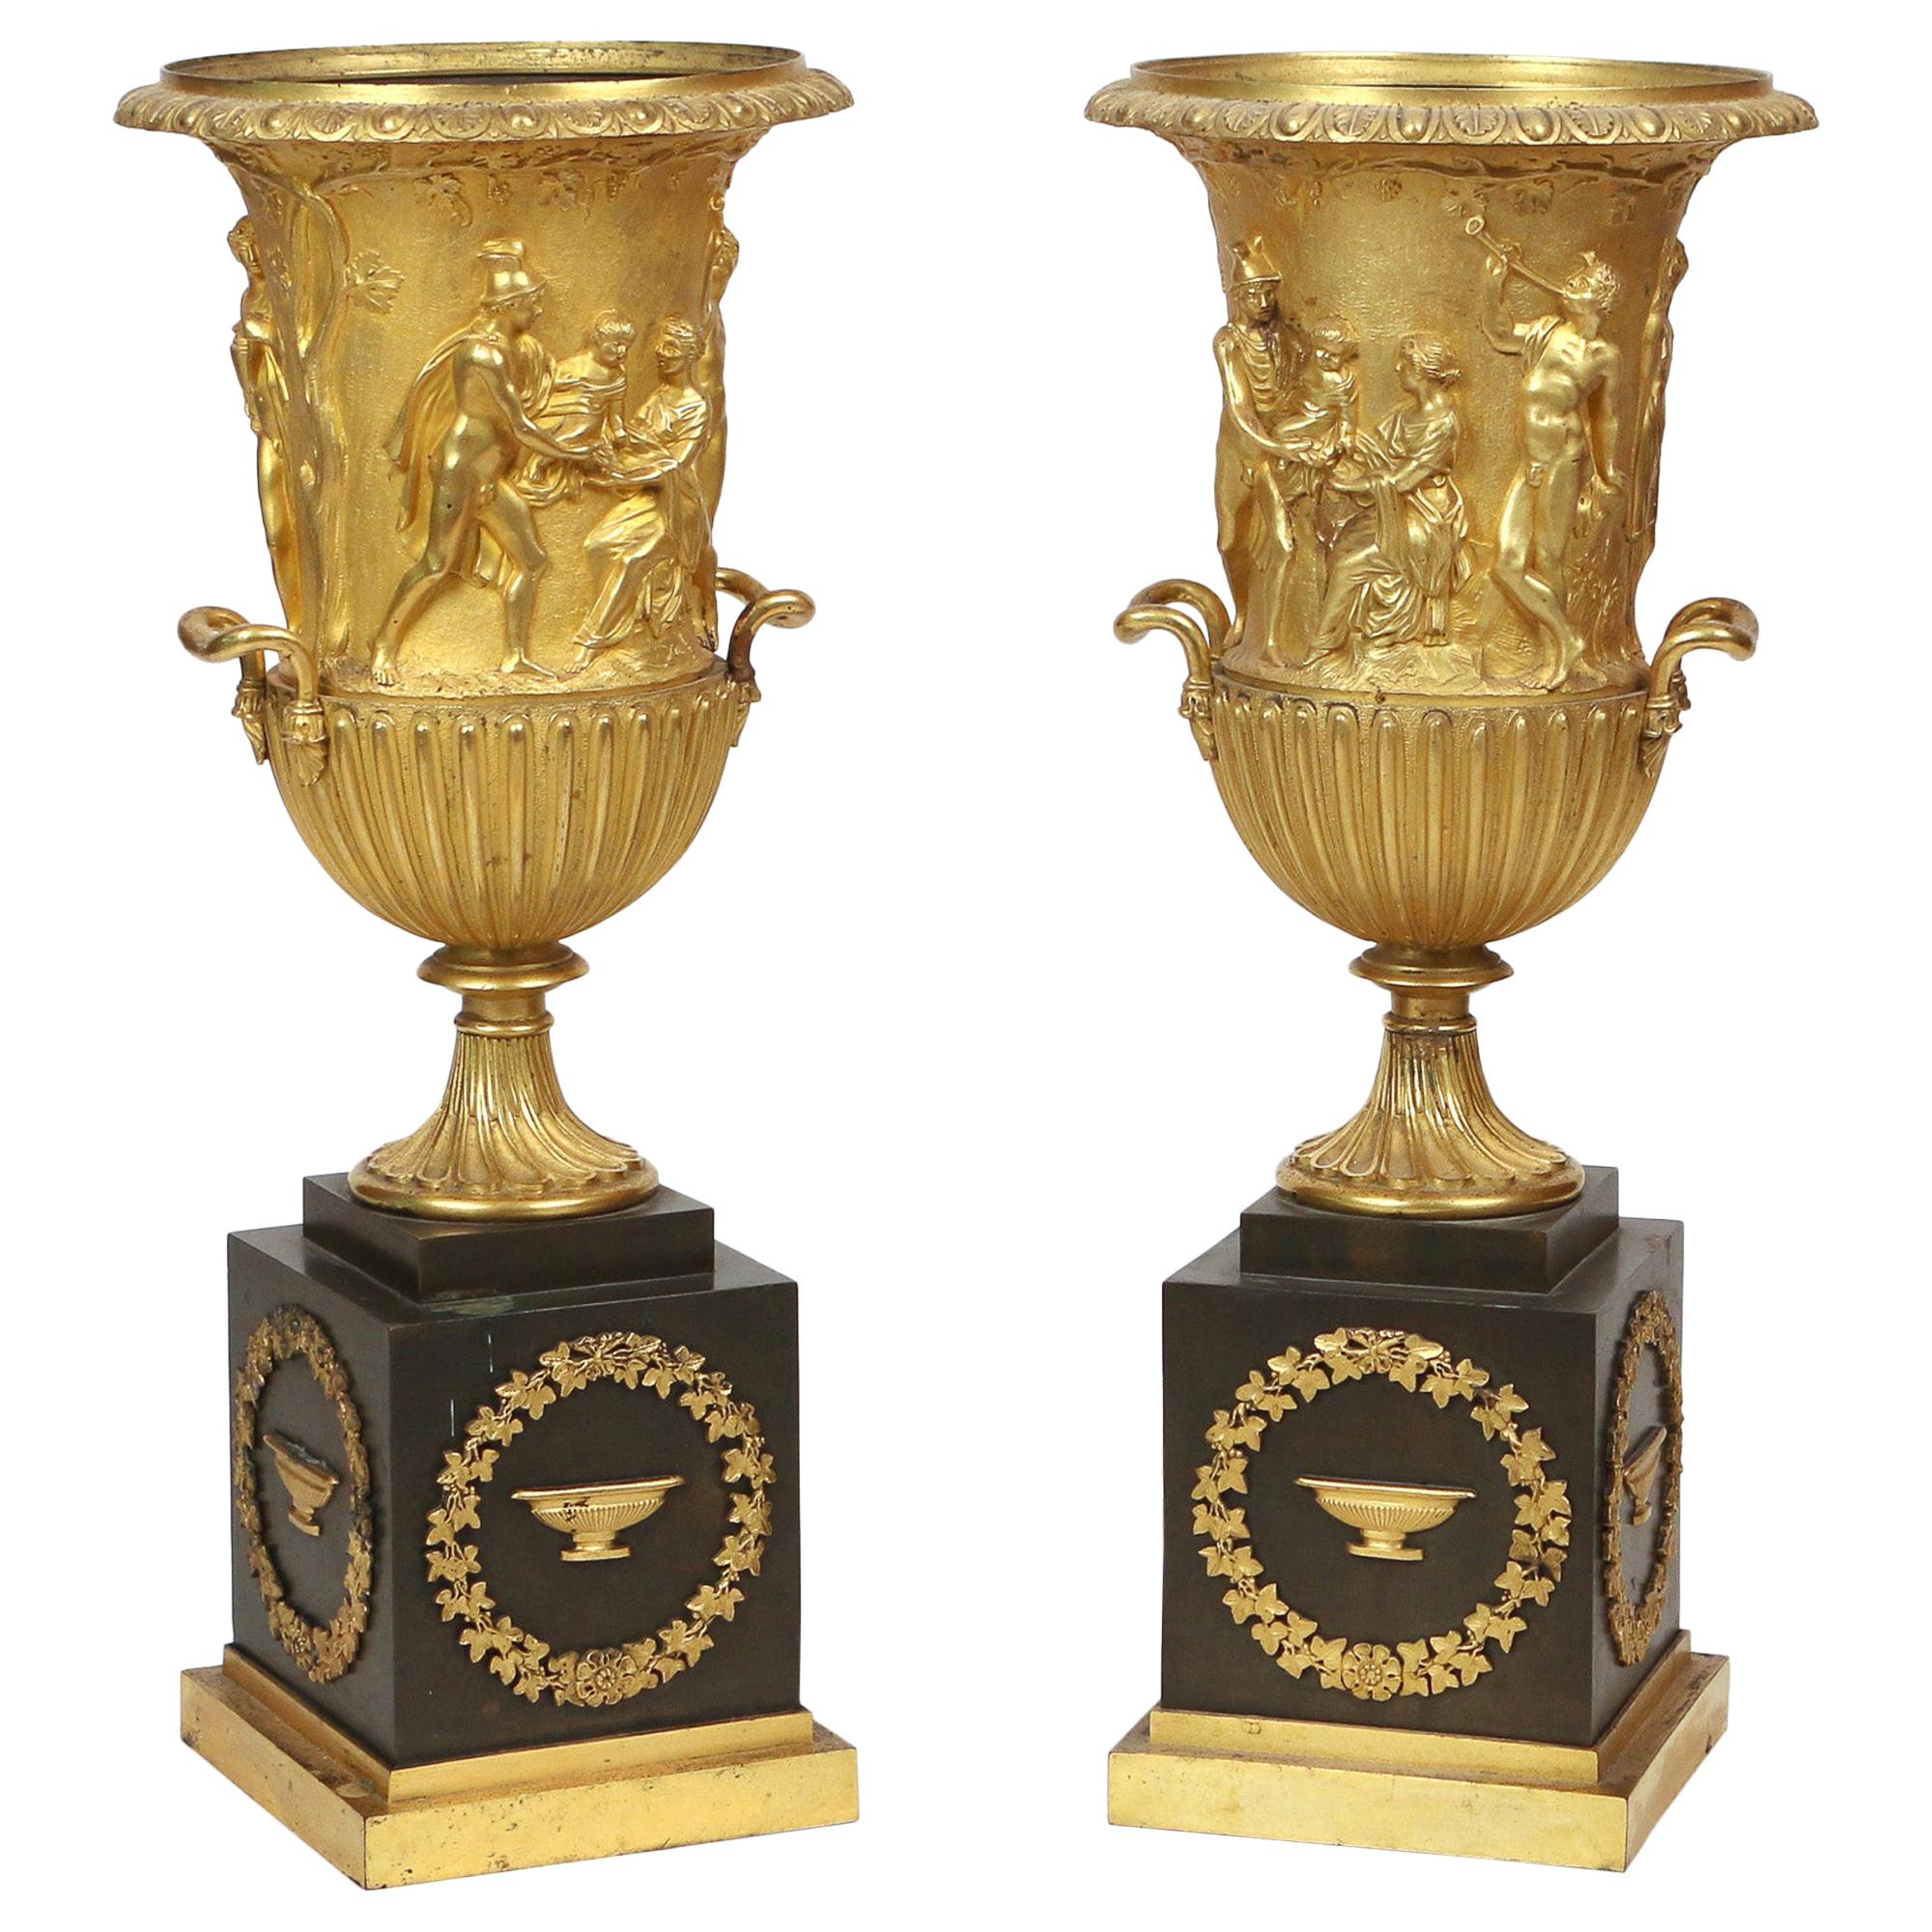 19th Century Pair of Gilt Bronze and Black Onyx Neoclassical Urns